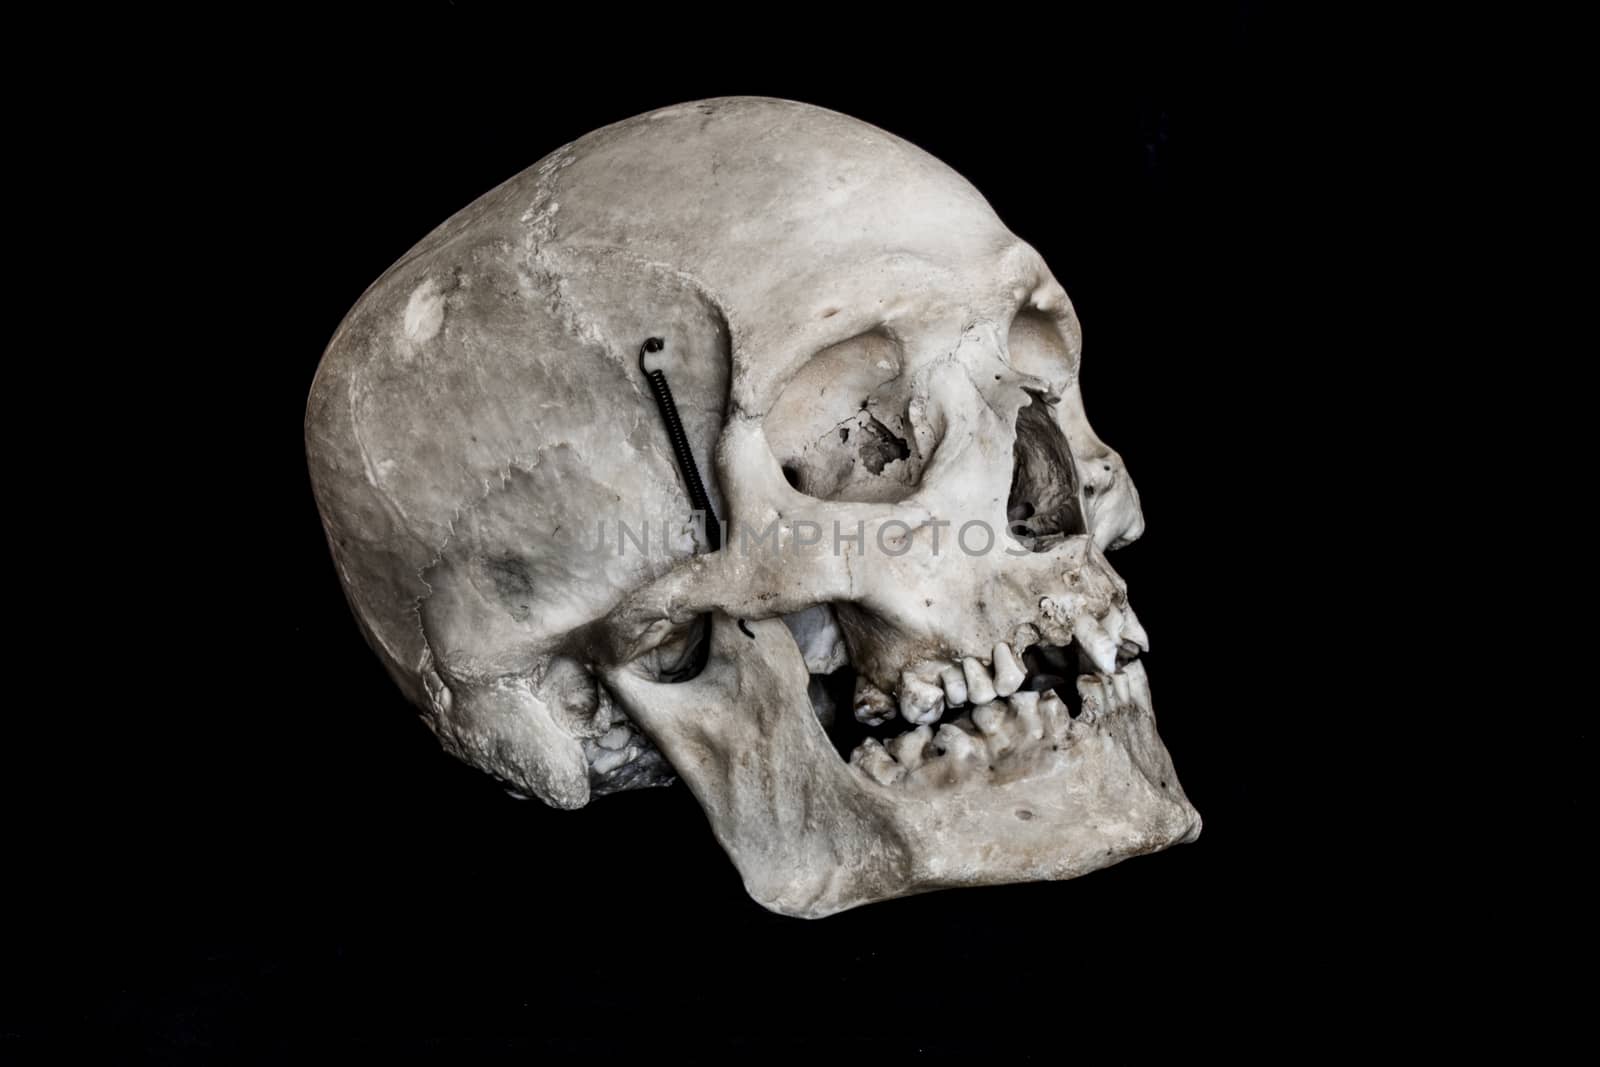 A real human skull on a black background